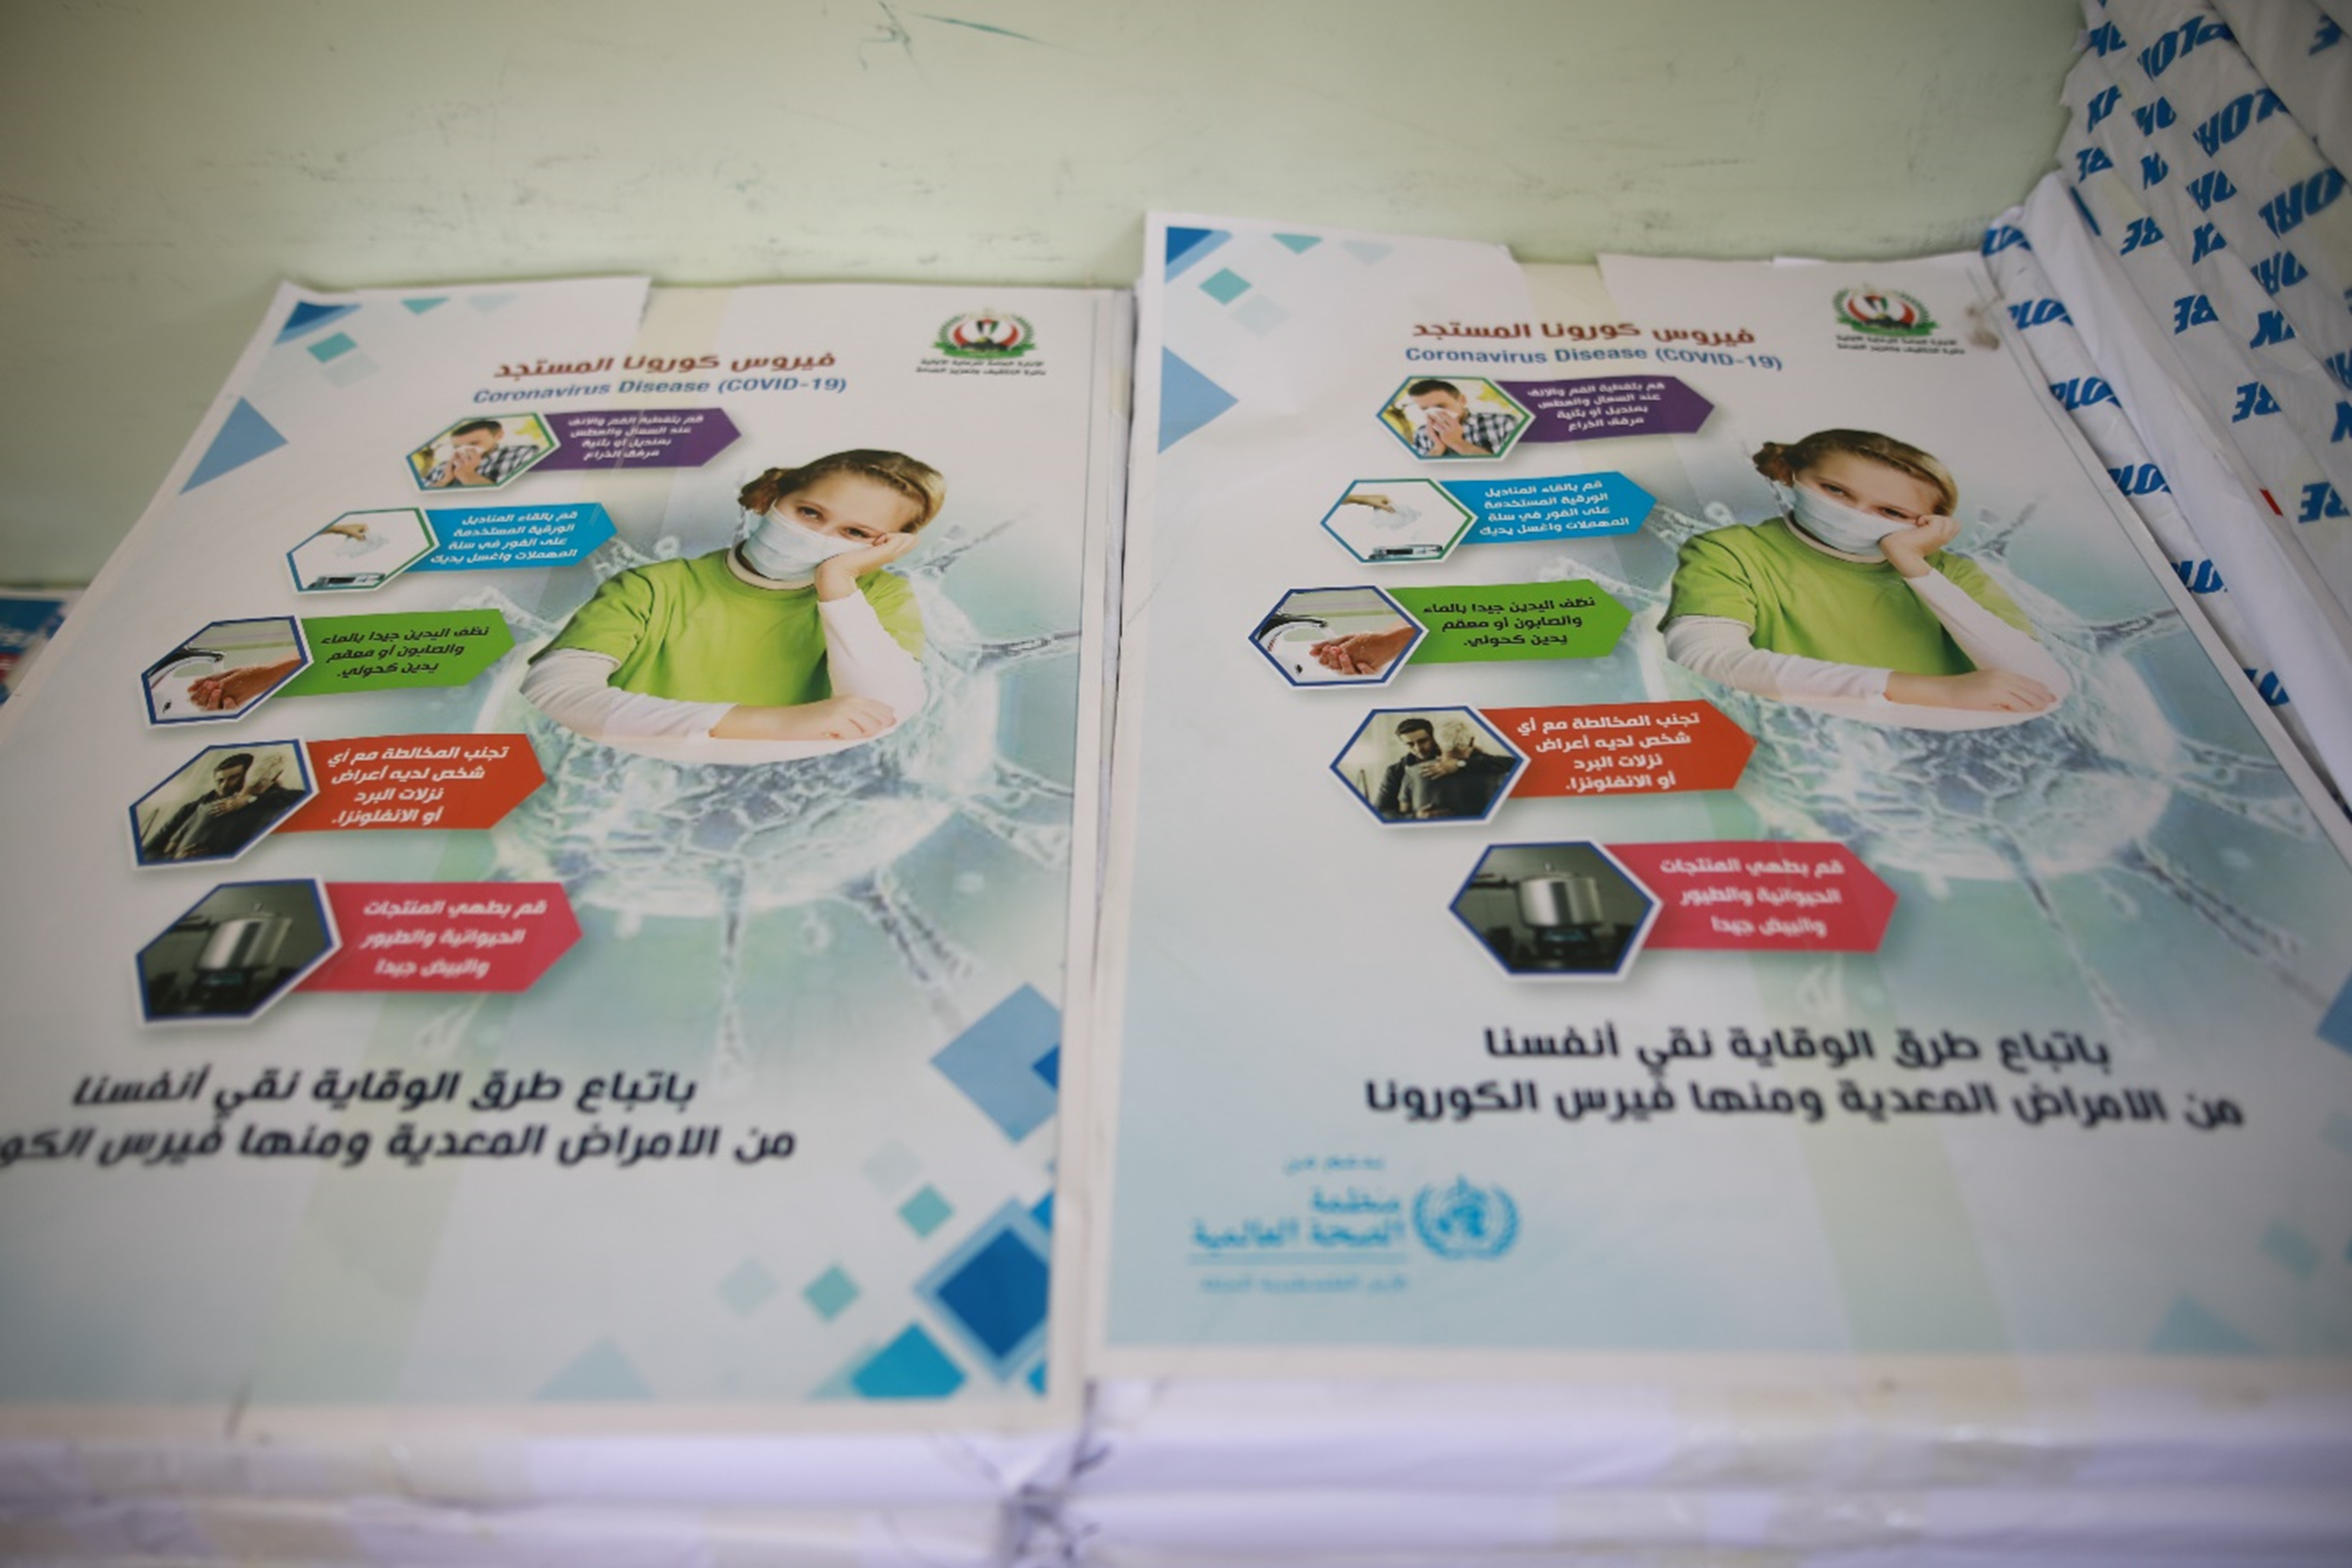 Public health material on COVID-19 set to be disseminated to raise awareness among people in Gaza. Photo by the World Health Organization